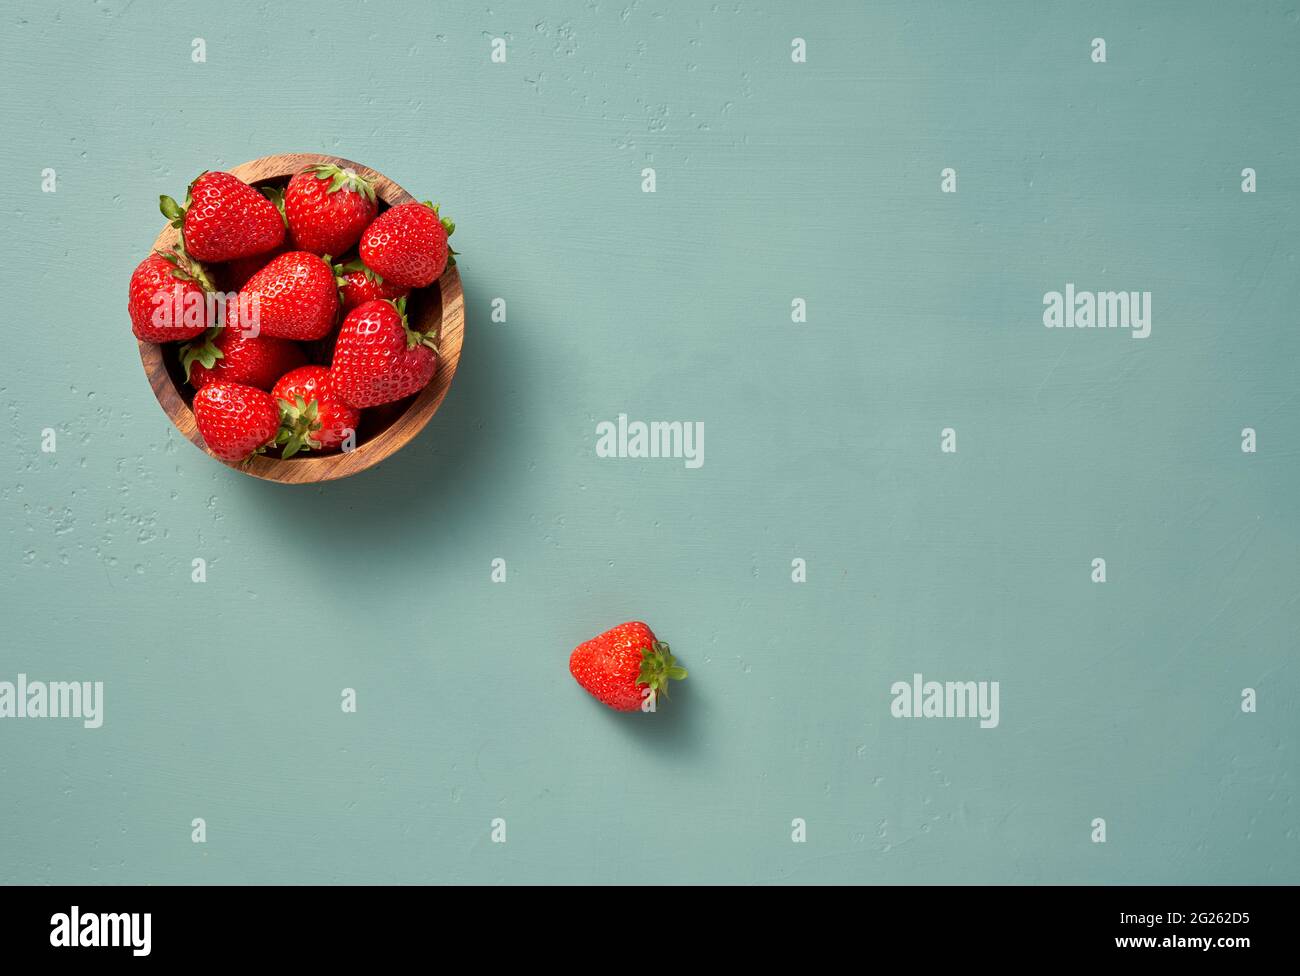 Fresh strawberry on a blue background. Top view of strawberries with leaves in wooden bowl. Stock Photo